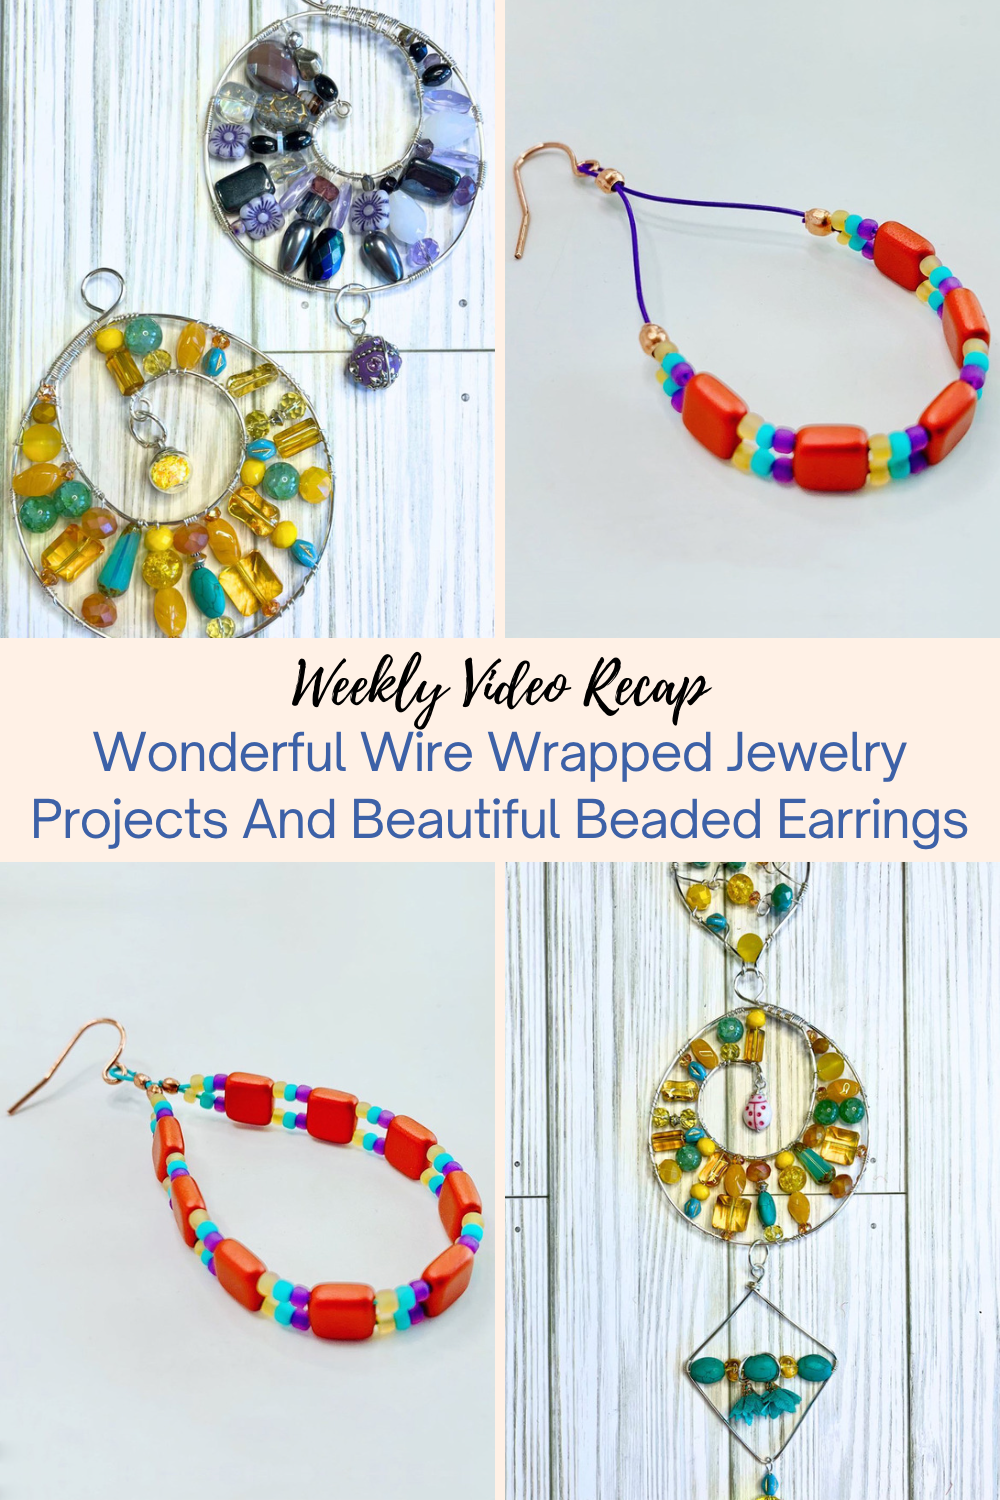 Wonderful Wire Wrapped Jewelry Projects And Beautiful Beaded Earrings Collage